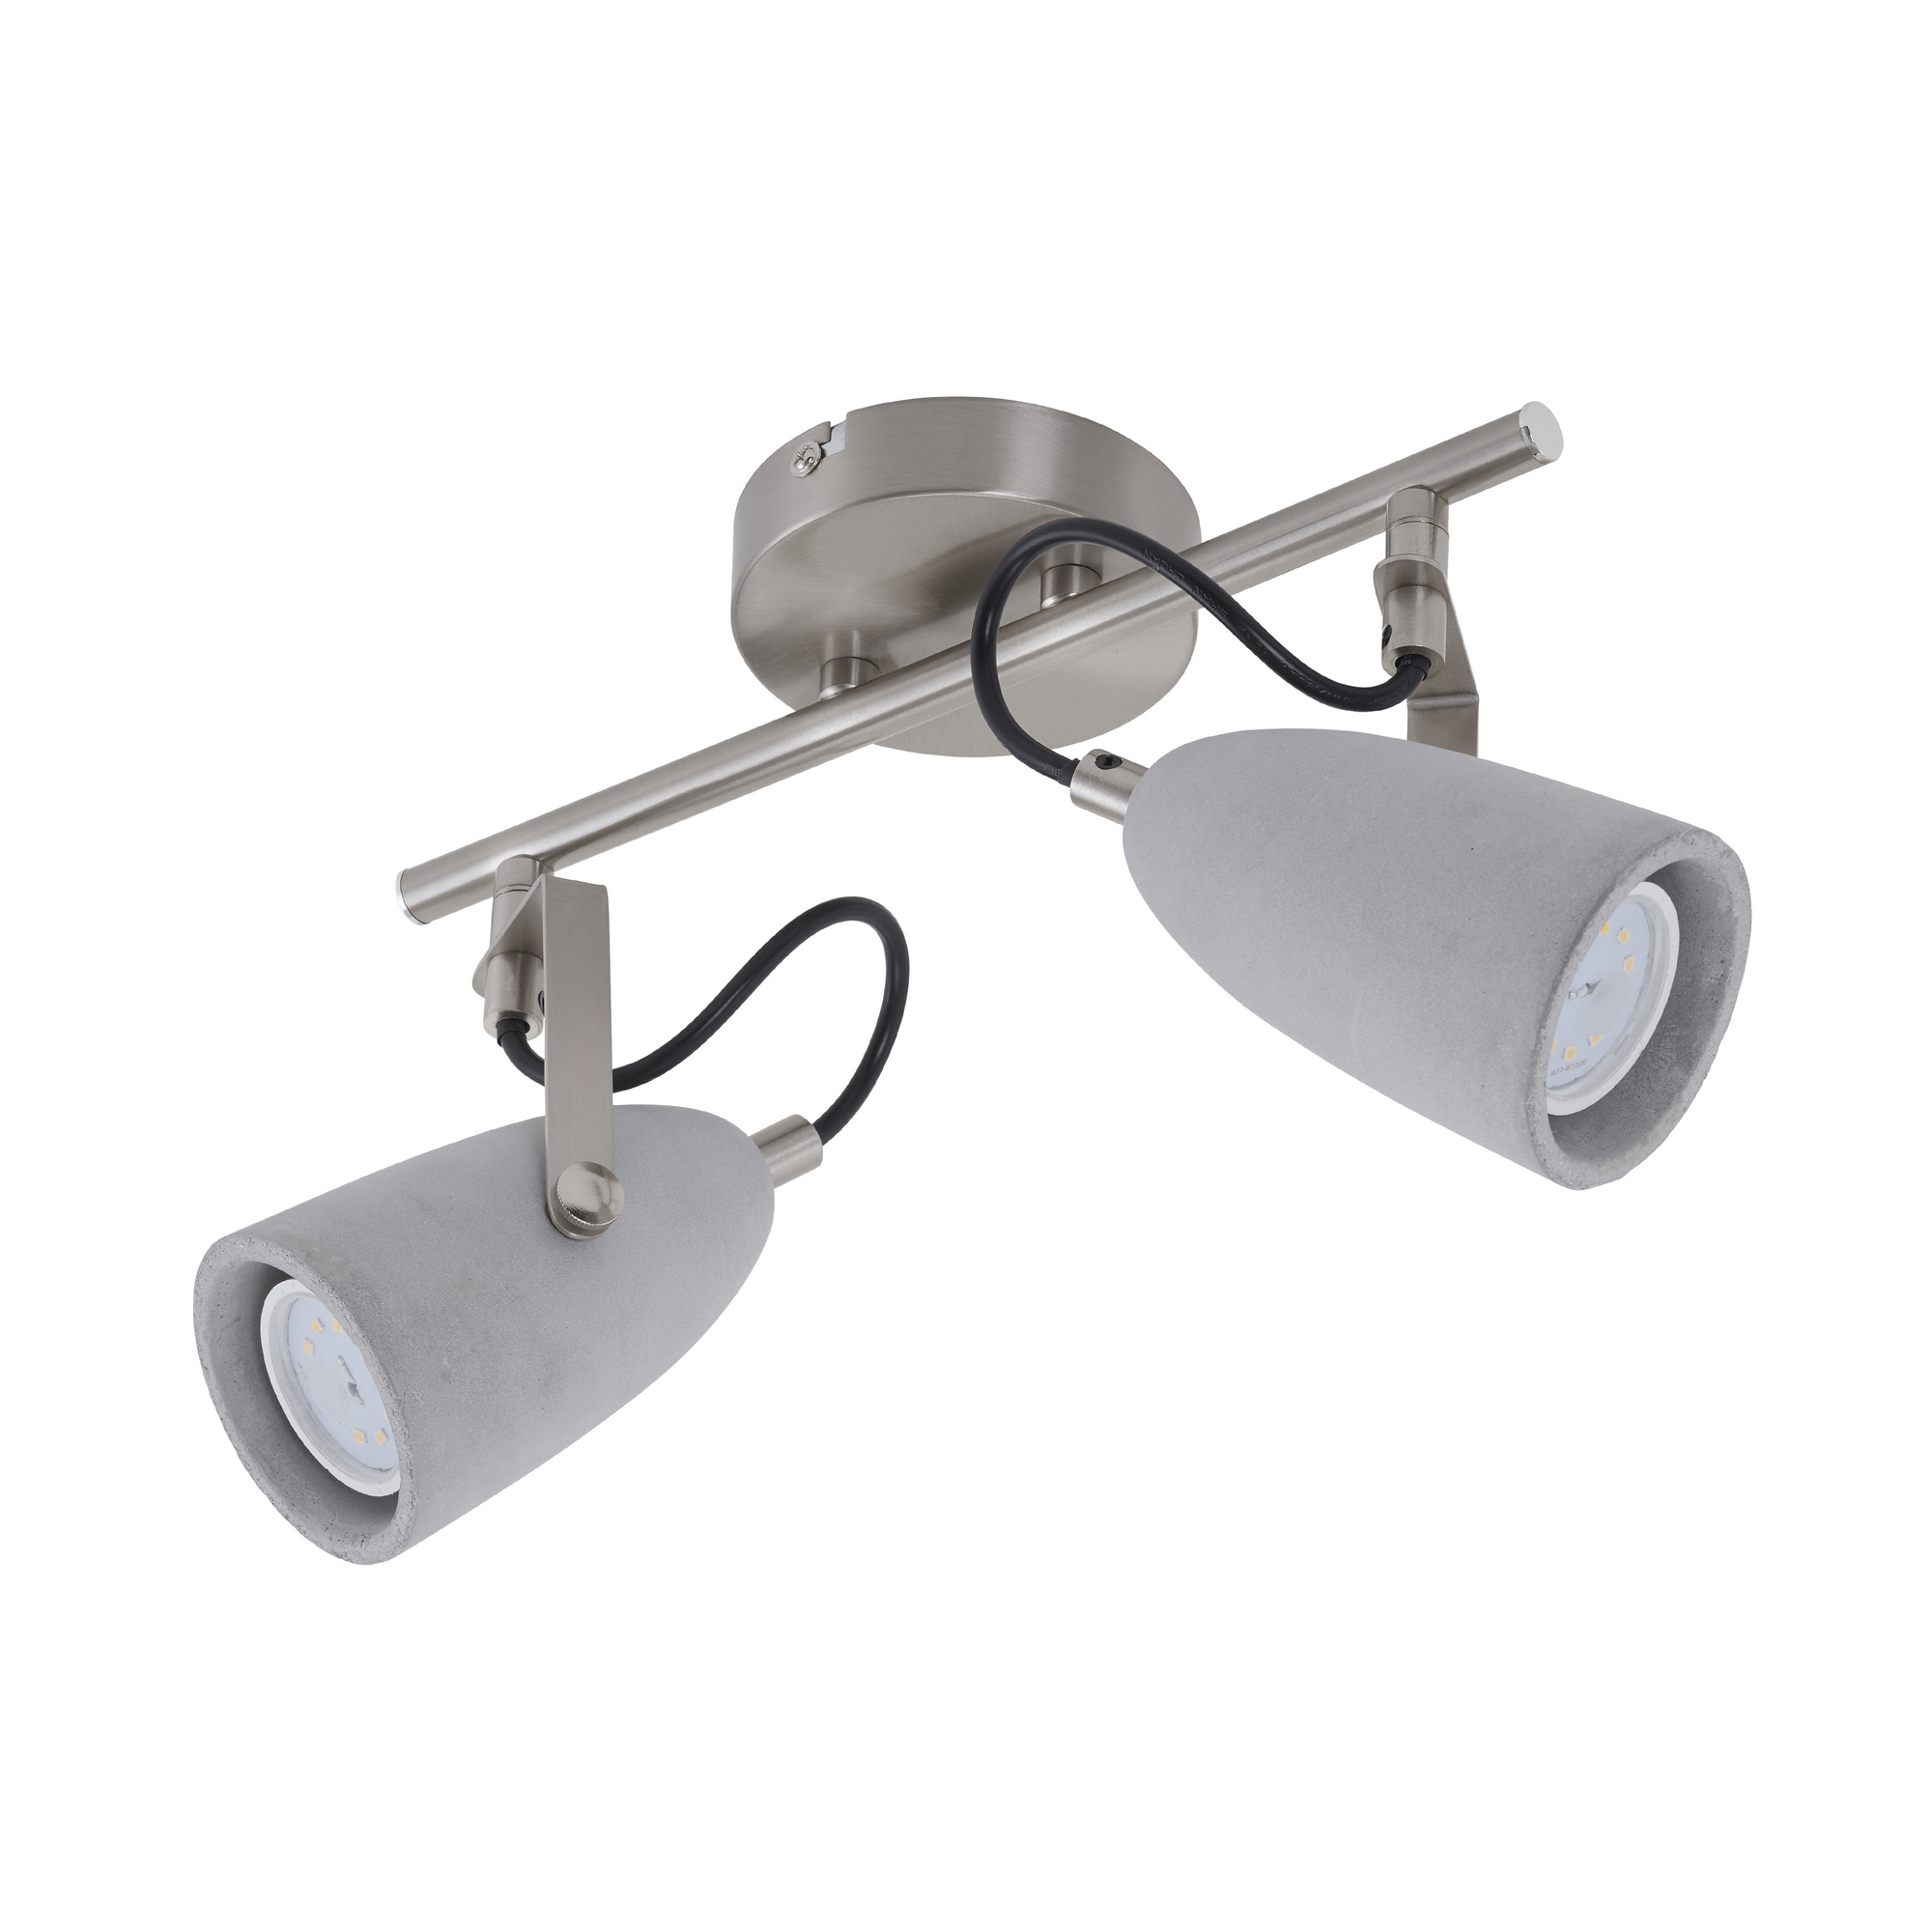 LED-Wohnraumstrahler 'Thimble' 2-flammig 400 lm nickelfarben + product picture